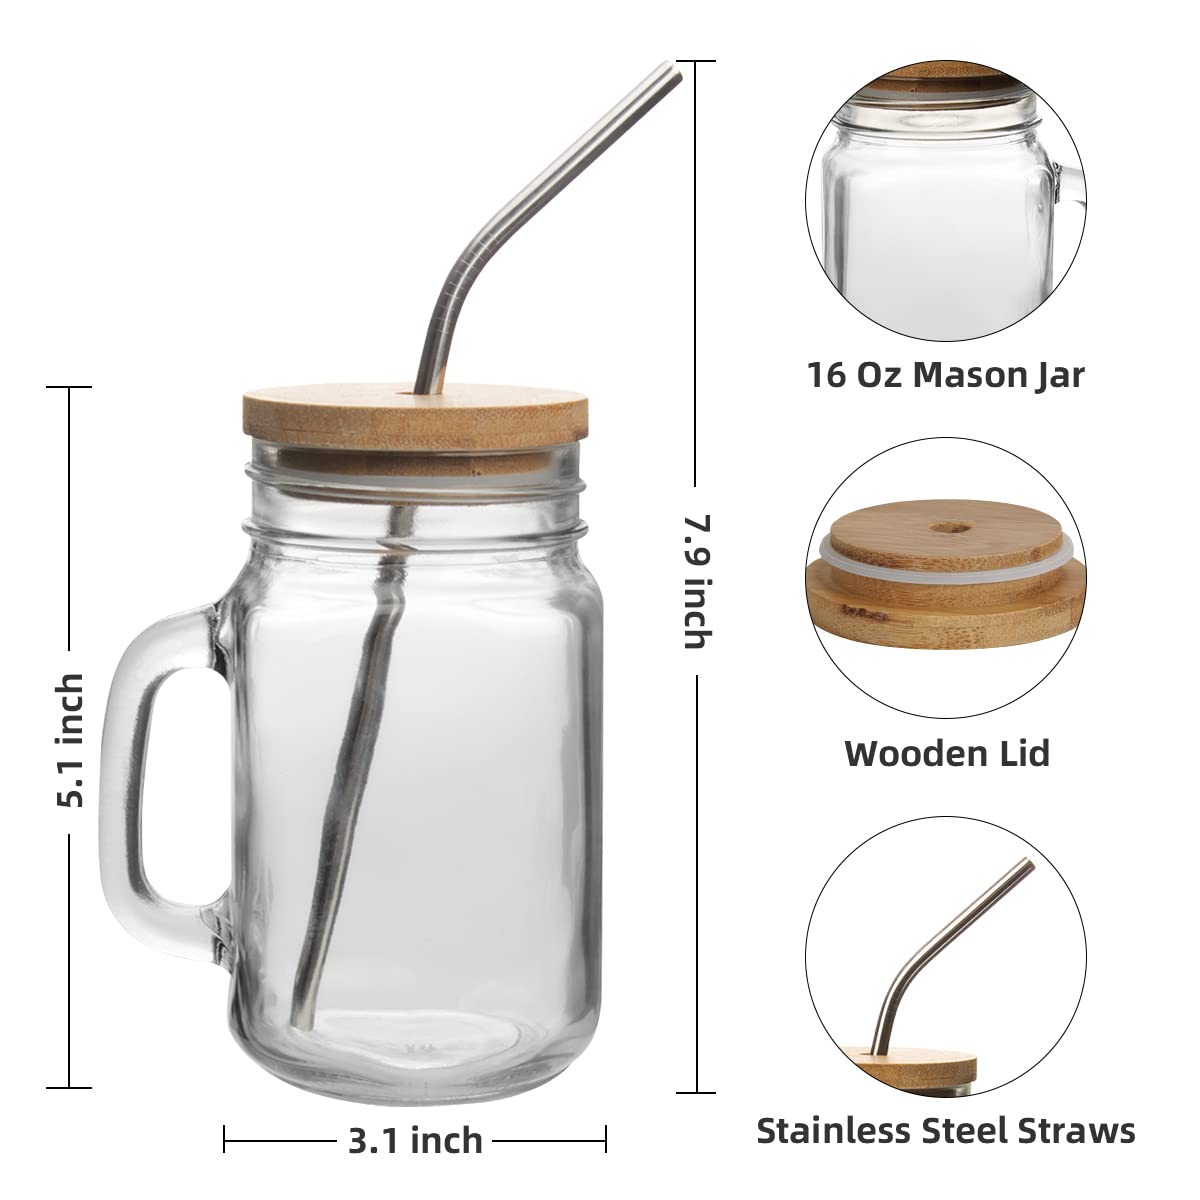 OAMCEG 6 Pack Mason Jars with Handle 16OZ Glass Mason Jar Cups with Lids and Straws, Large Glass Juice Bottles, Reusable Wide Mouth Smoothie Jars, Old Fashion Mason Jar Cups for Tea, Iced Coffee